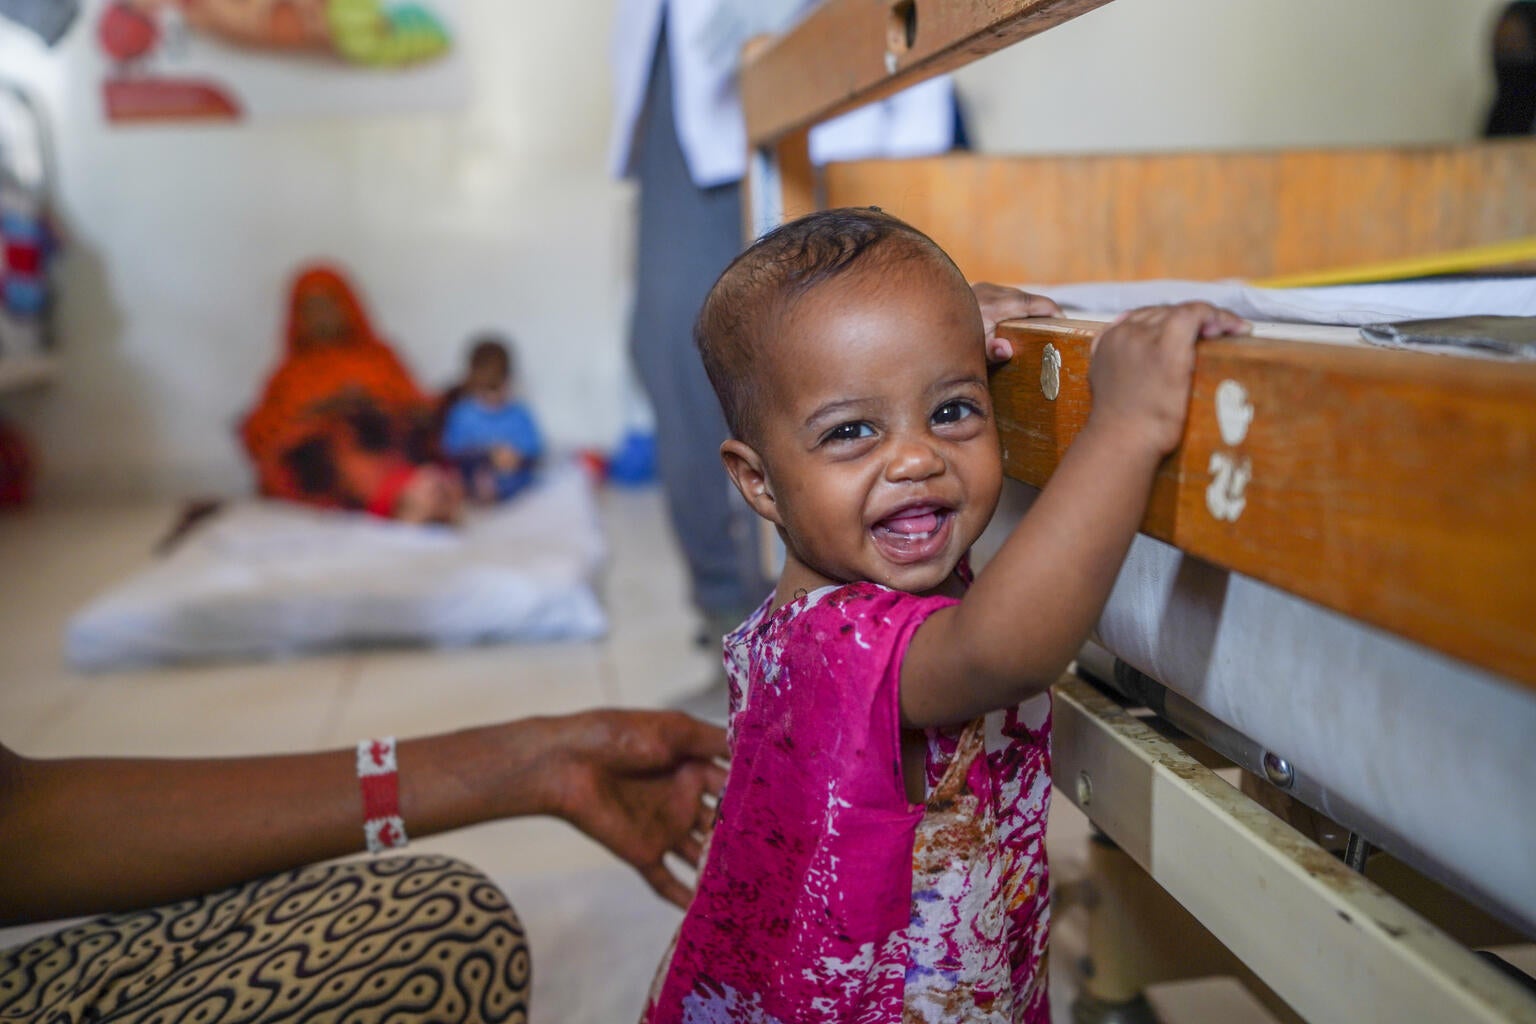 A one-year-old girl recovering from malnutrition in a Stabilisation Centre in Somalia is smiling at the camera.